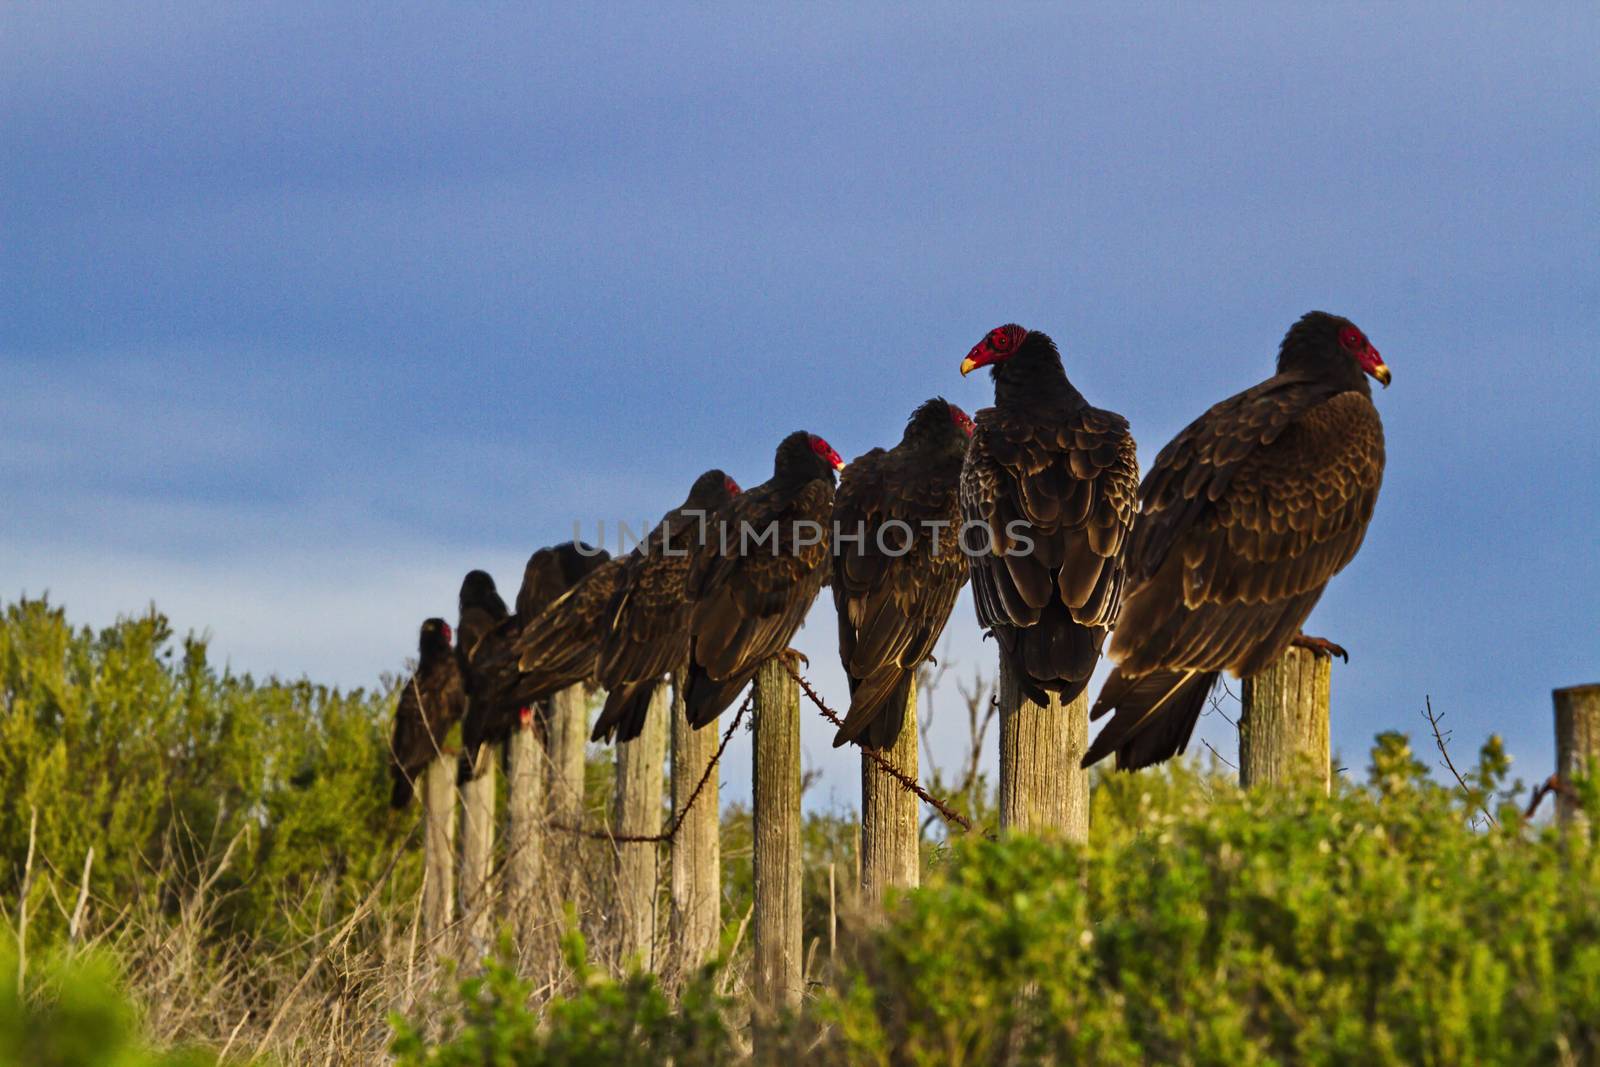 Single turkey vulture differentiates by unique turn in a different direction.  Line of birds on fence post.  Location is along Highway 1 in California near San Simeon and Cambria.  